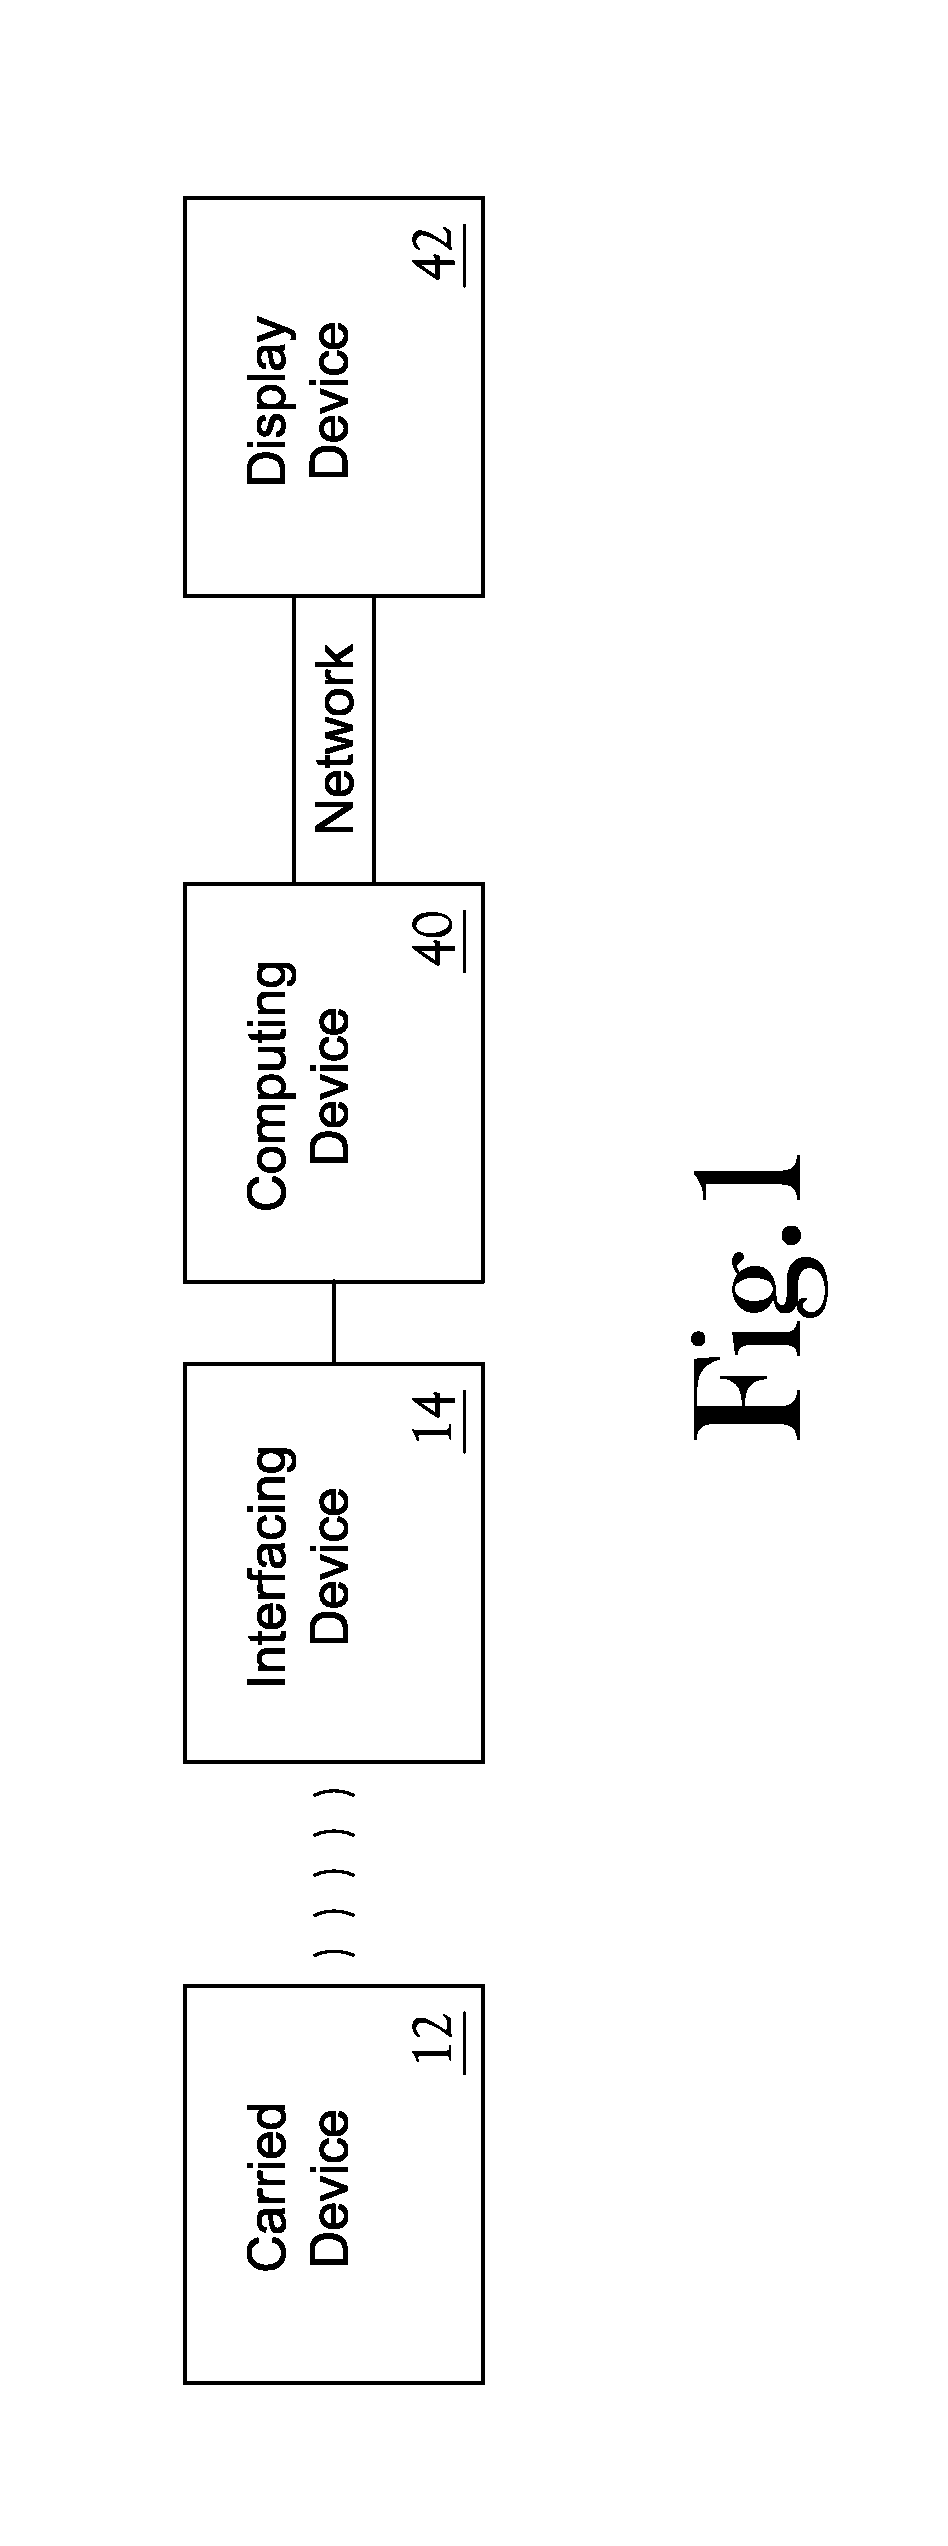 System for Detecting Information Regarding an Animal and Communicating the Information to a Remote Location